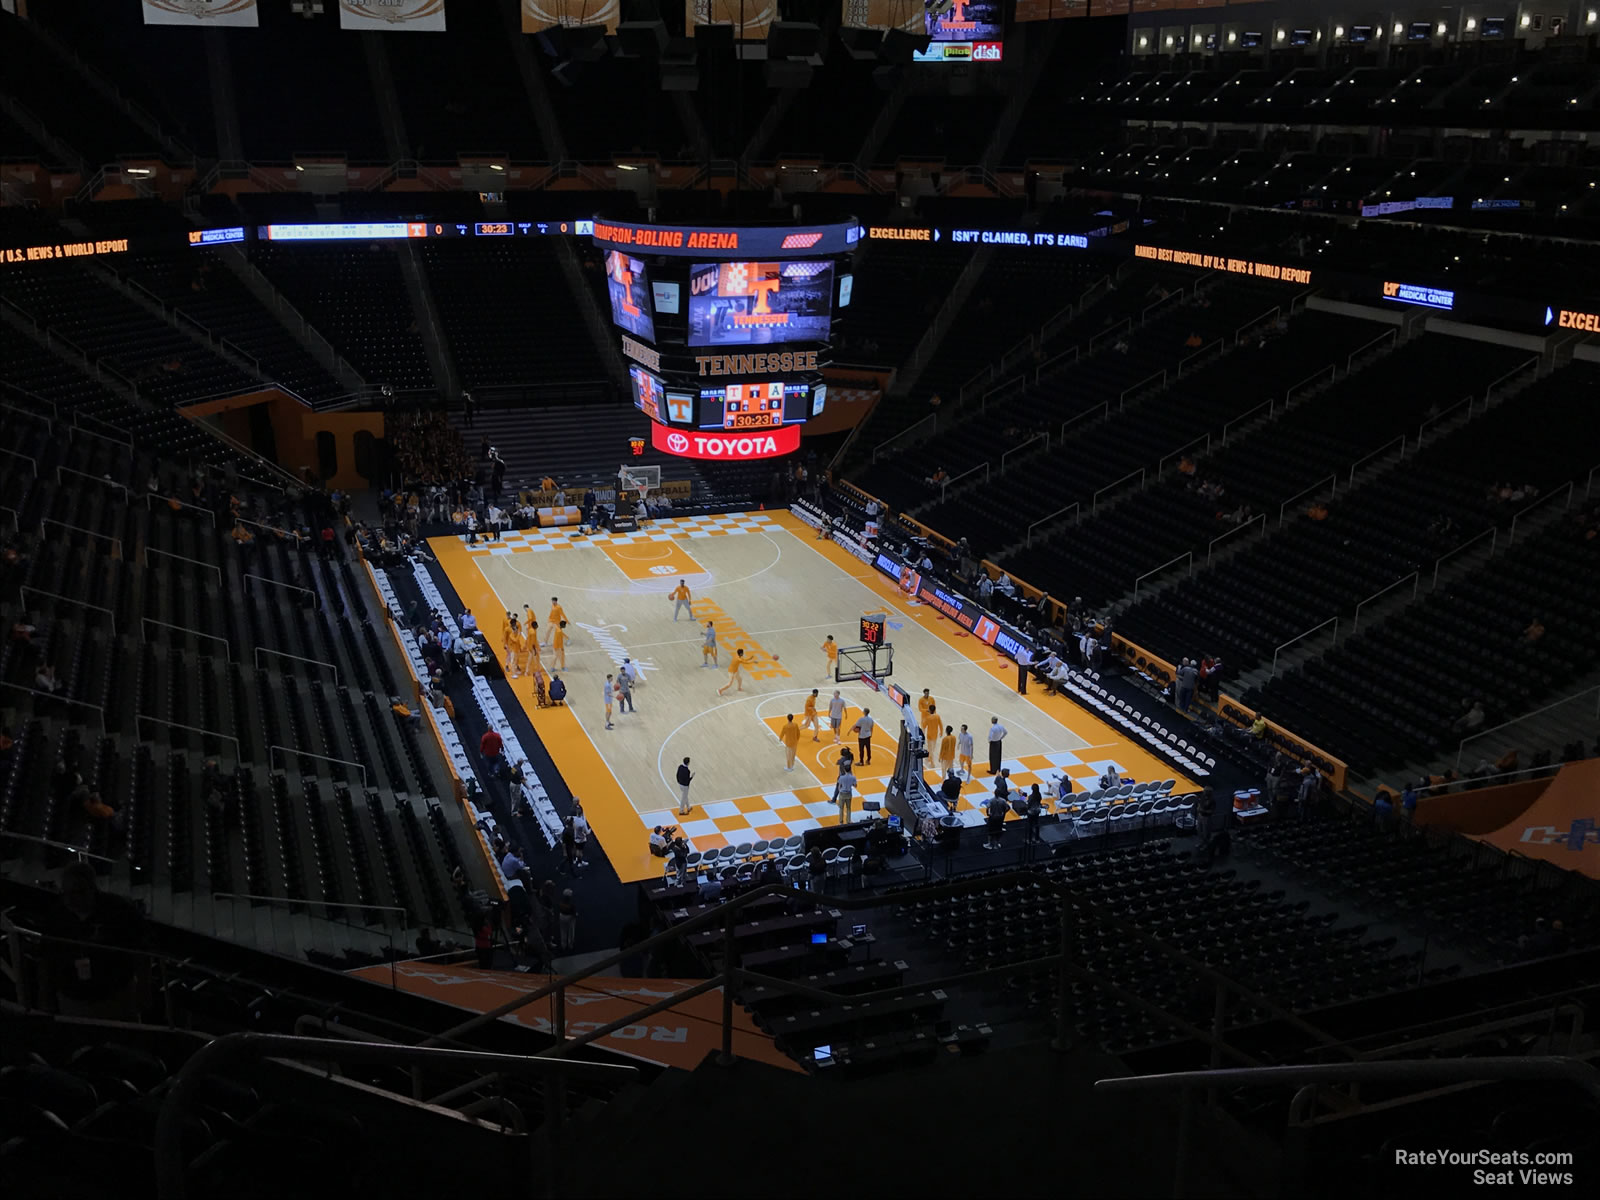 section 315a, row 7 seat view  - thompson-boling arena